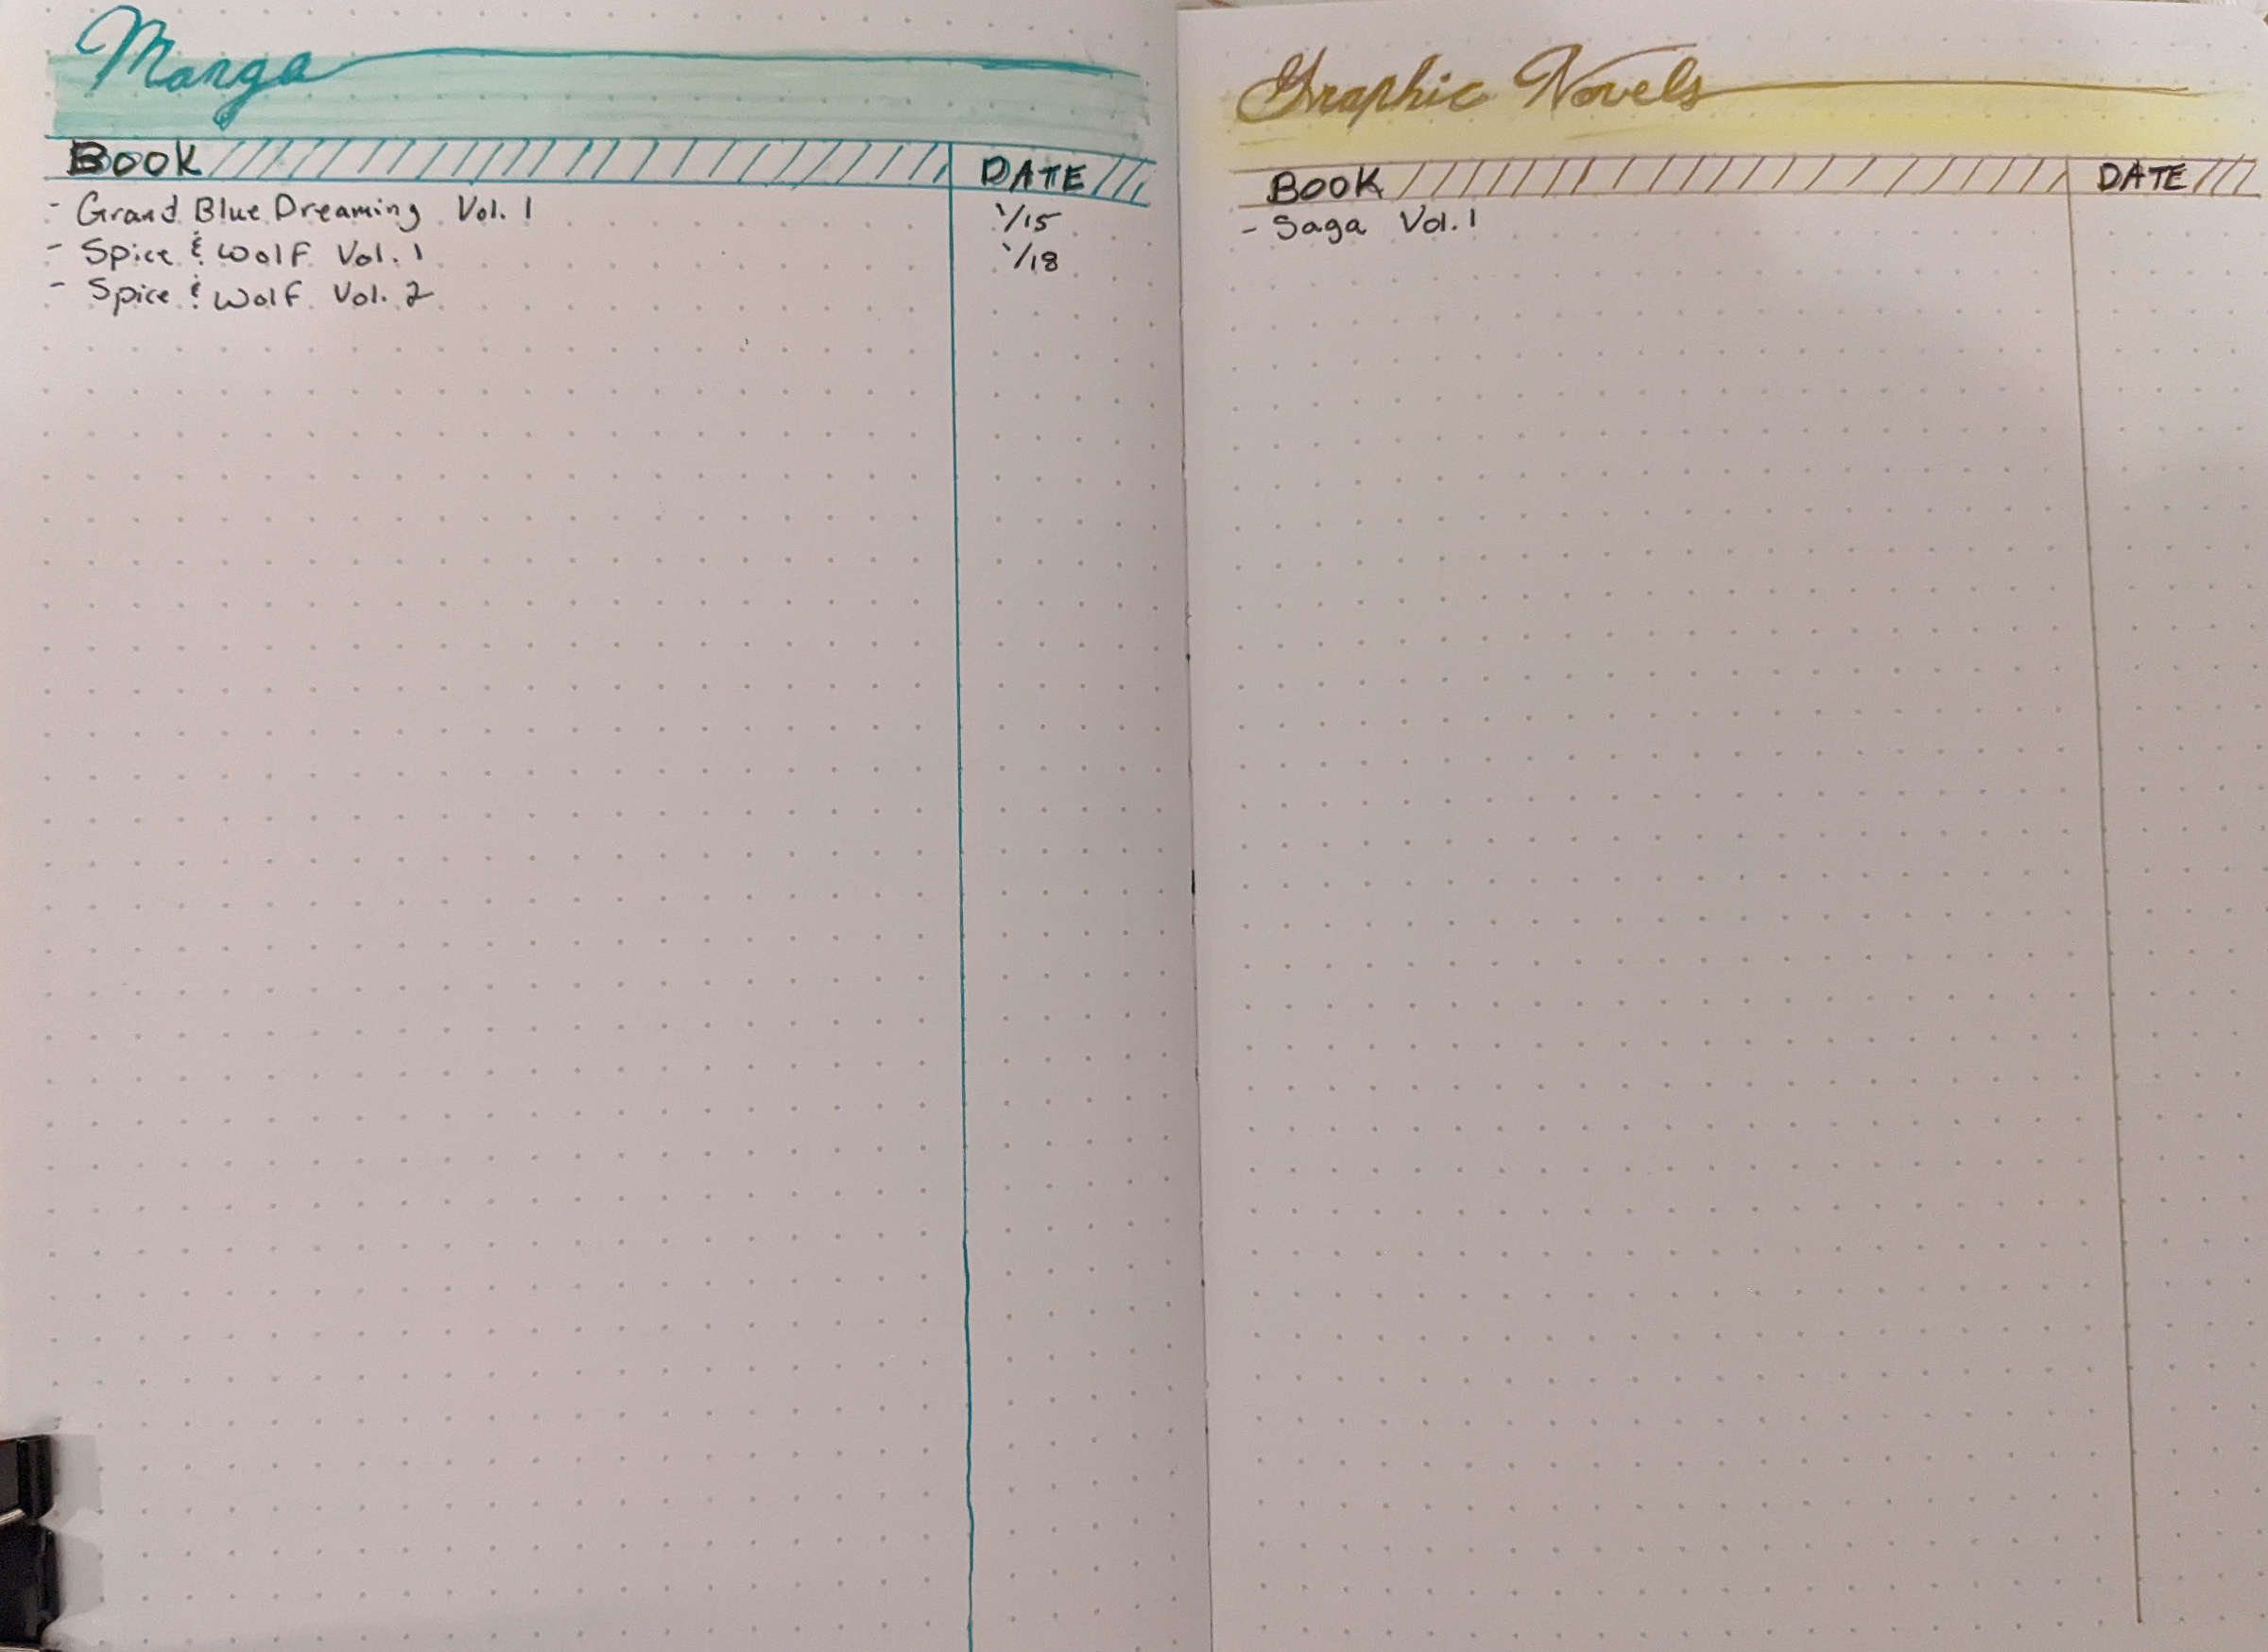 Two-page bullet journal spread. On the left is a “manga” section.  On the right is a “graphic novels” section.